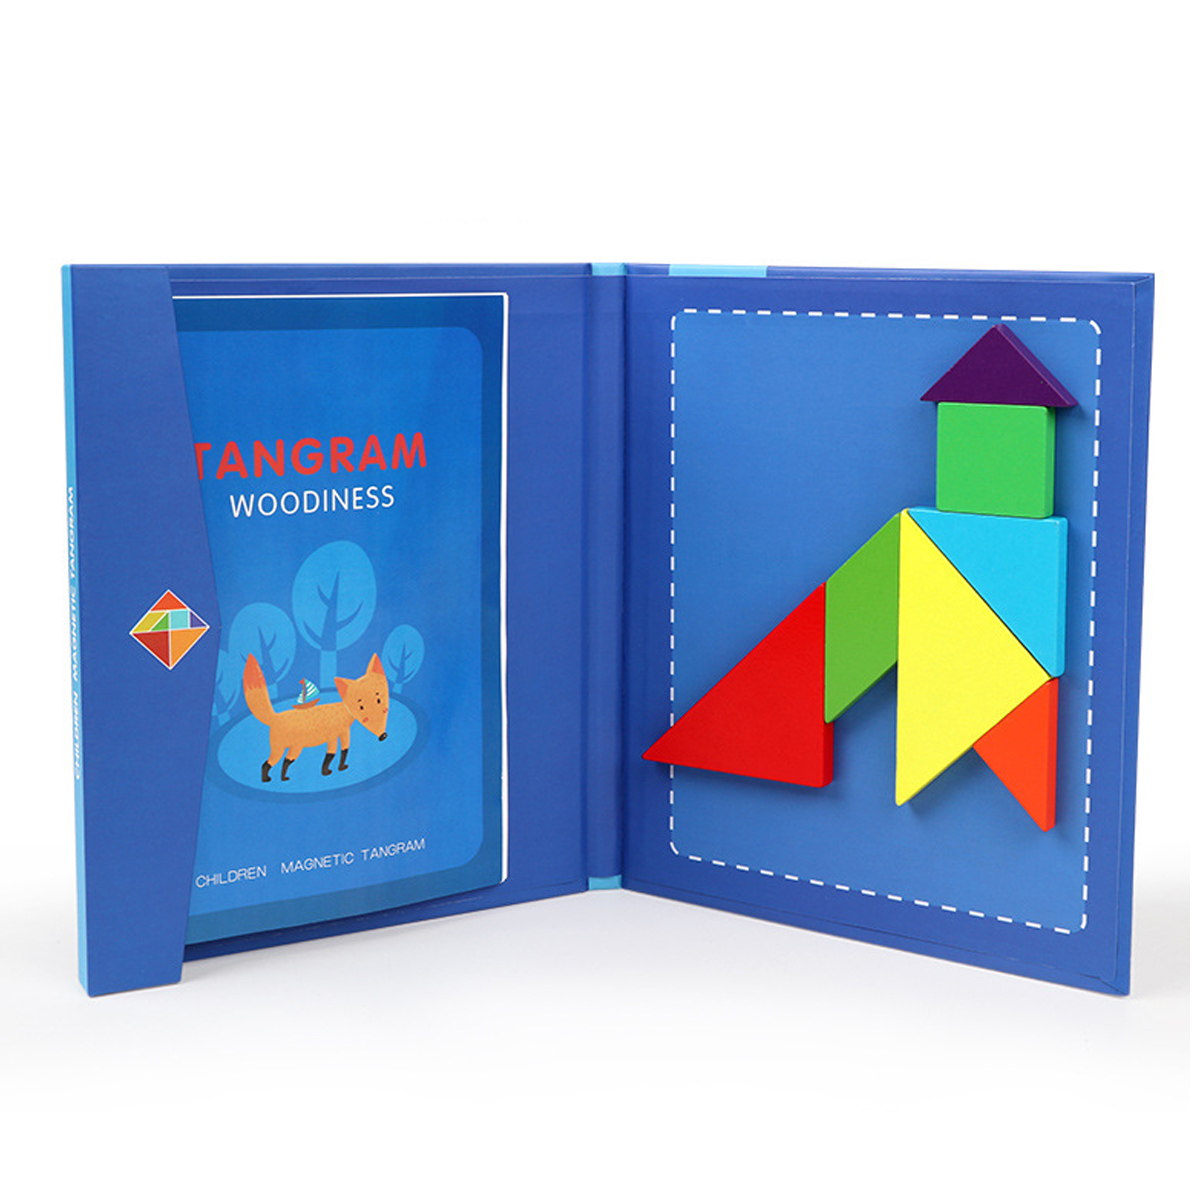 Kids-Child-Magnetic-Tangram-Jigsaw-Puzzle-Toy-Creative-Shape-DIY-Wooden-Puzzles-Montessori-1621514-10